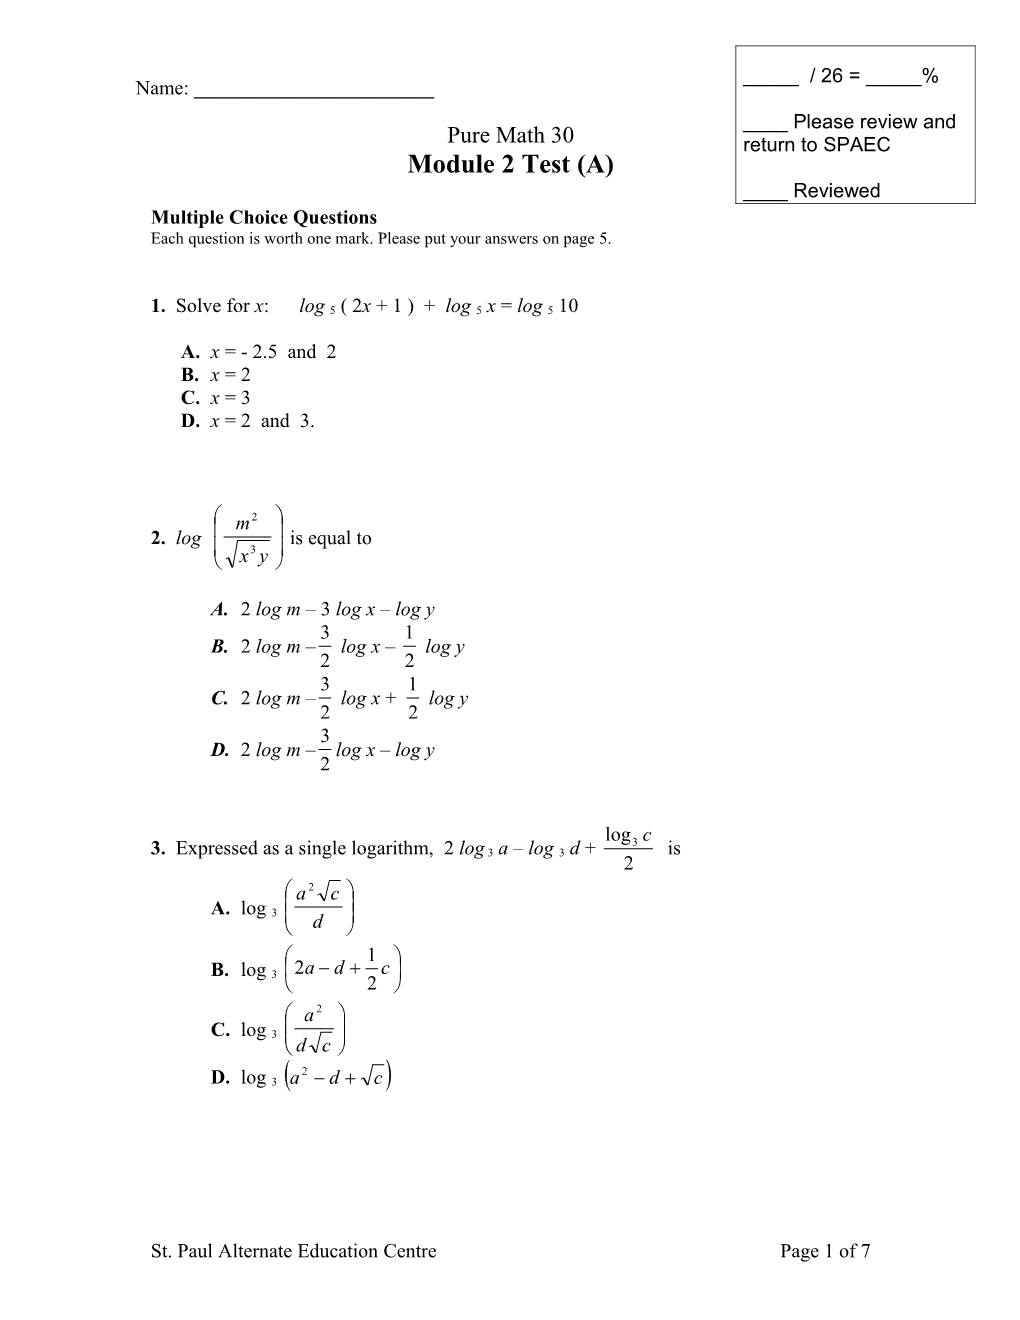 Multiple Choice Questions s27